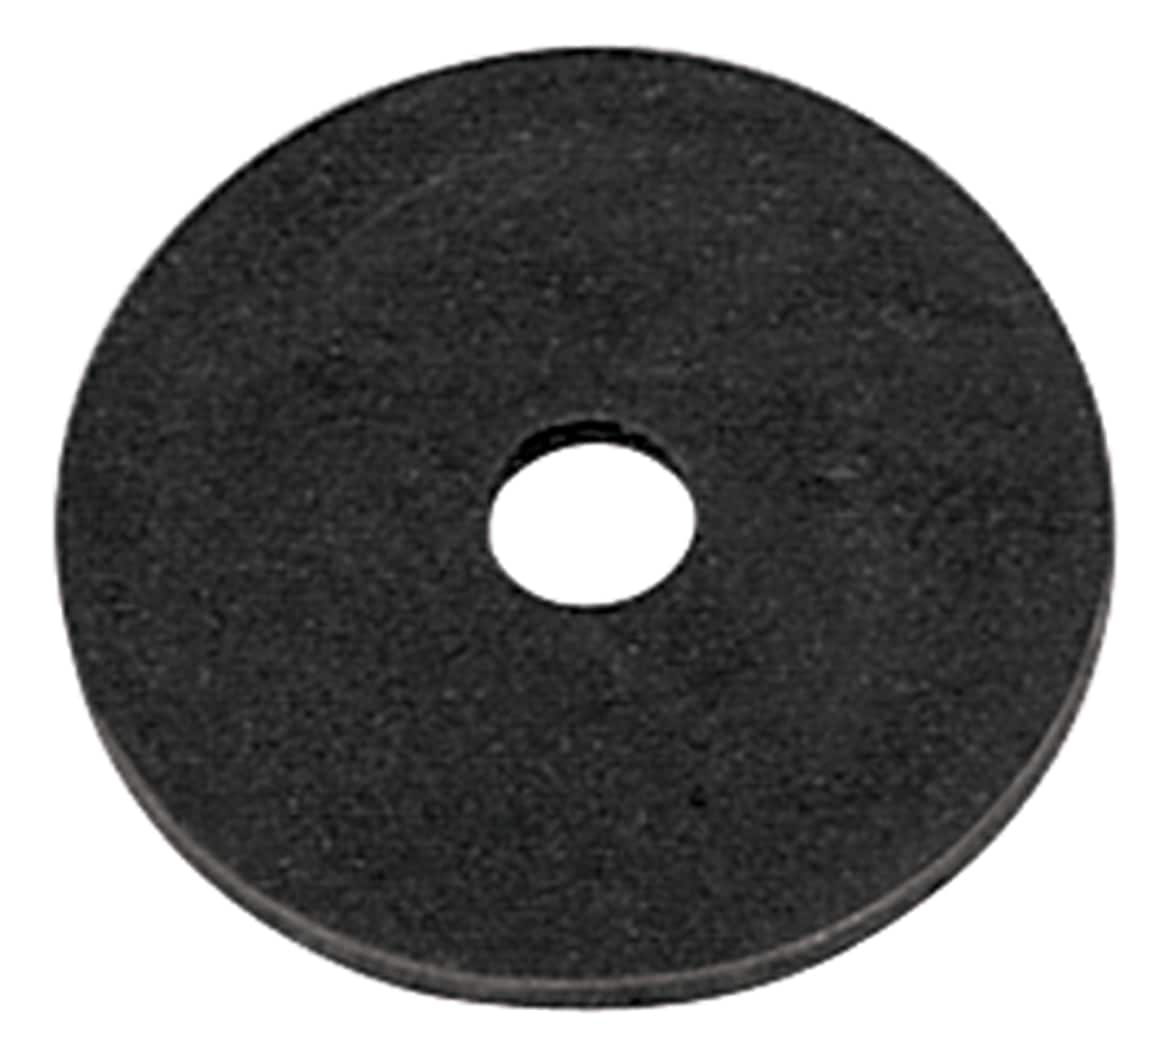 Neoprene Large Rubber Fender Washers 2 1/4" OD X 9/16" ID X 1/8" Thickness 